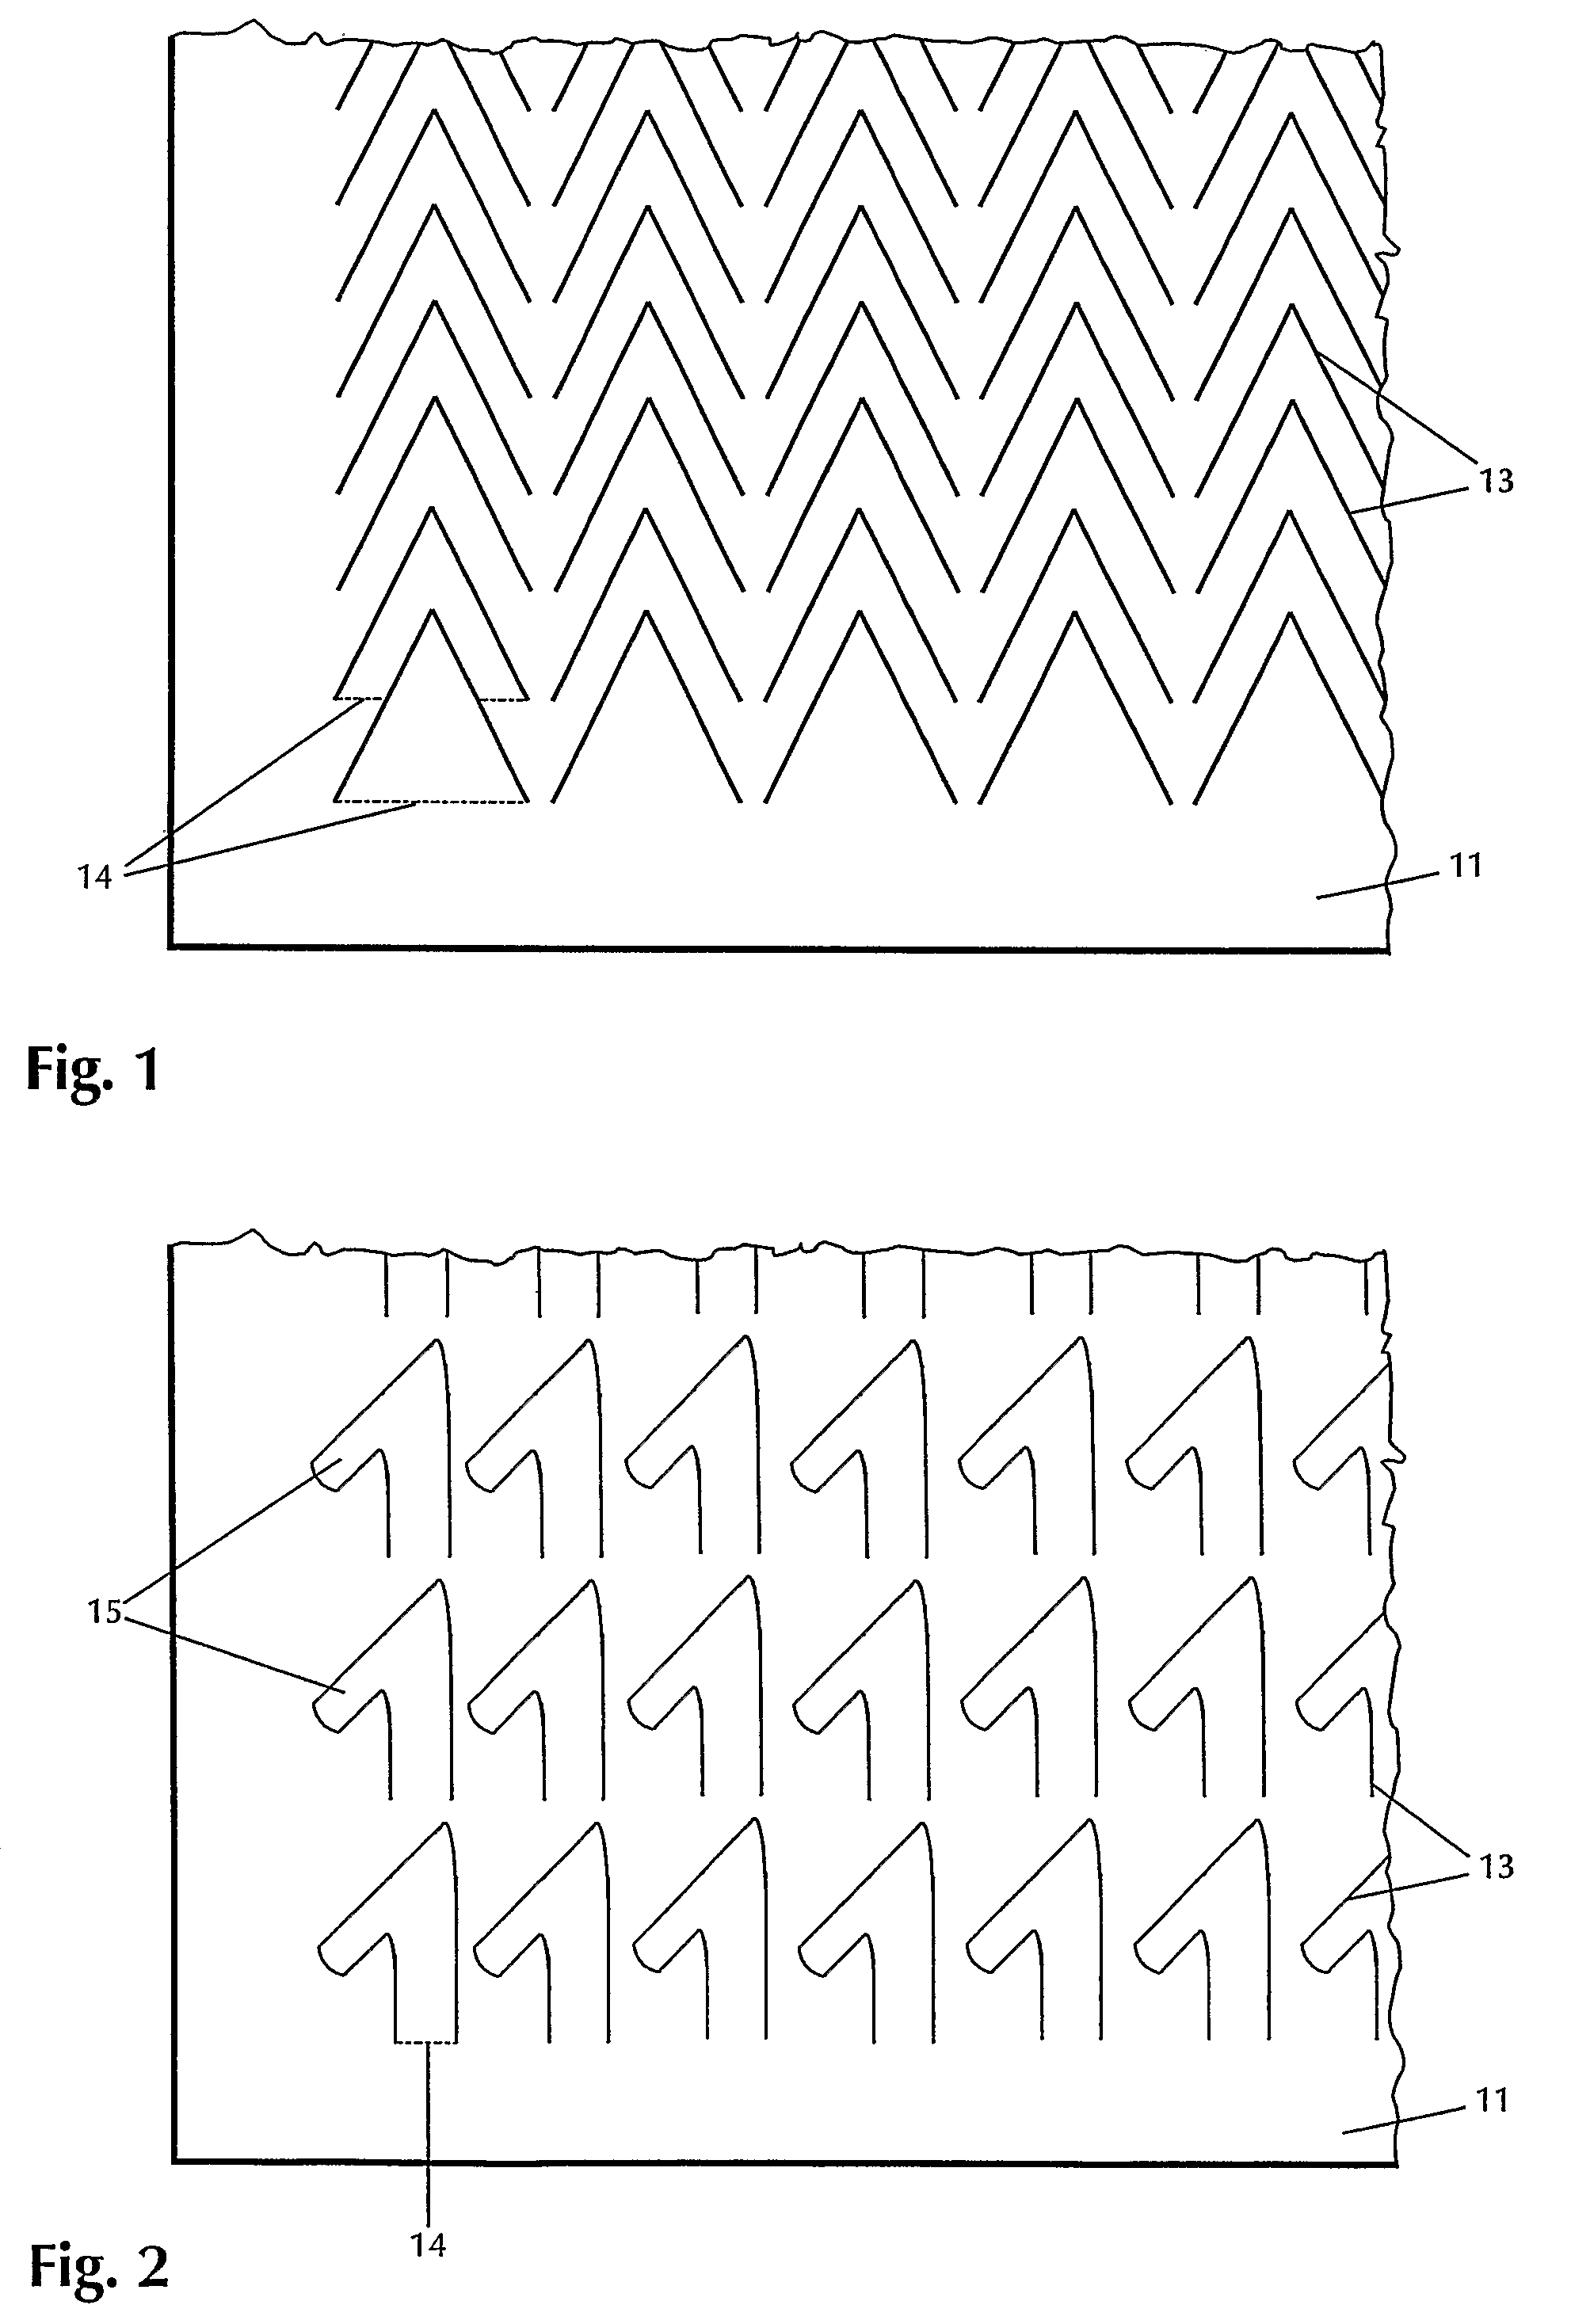 Mounting device having a metallic base plate with multiple hook-like projections obtained by stamping or laser cutting and bending